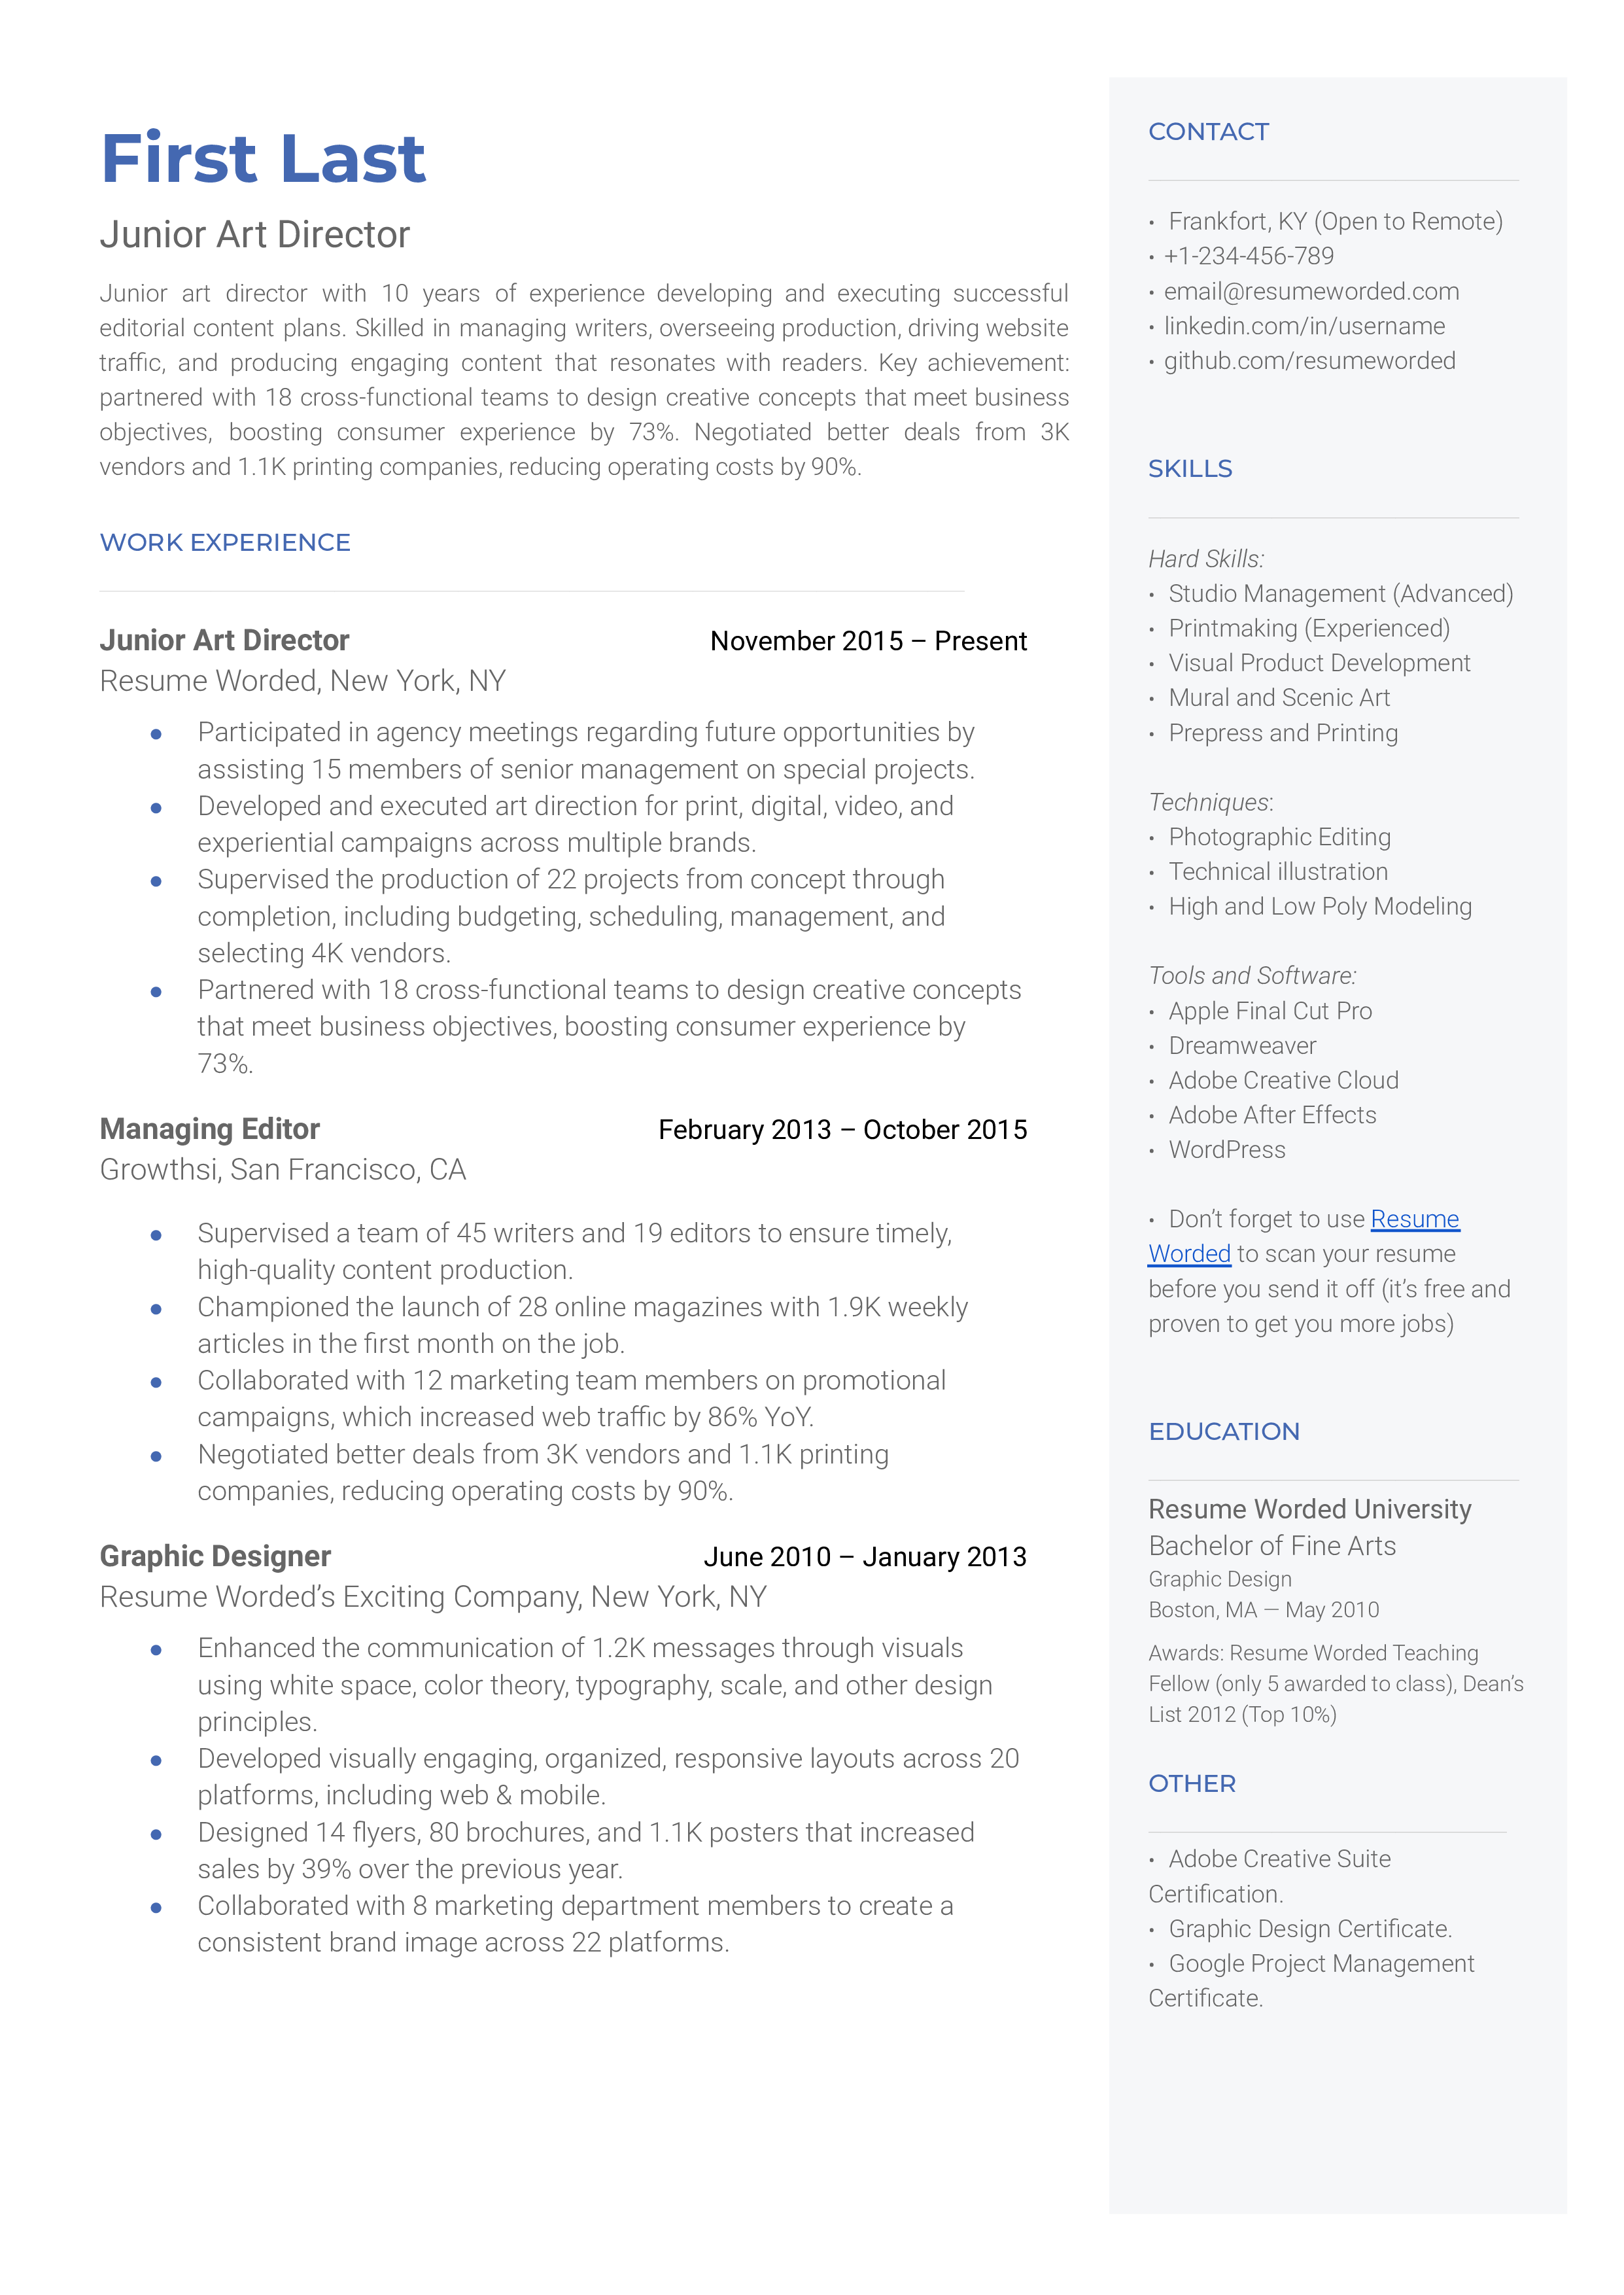 A junior art director’s resume sample that highlight’s the applicant’s impressive skills and education section, and design background.